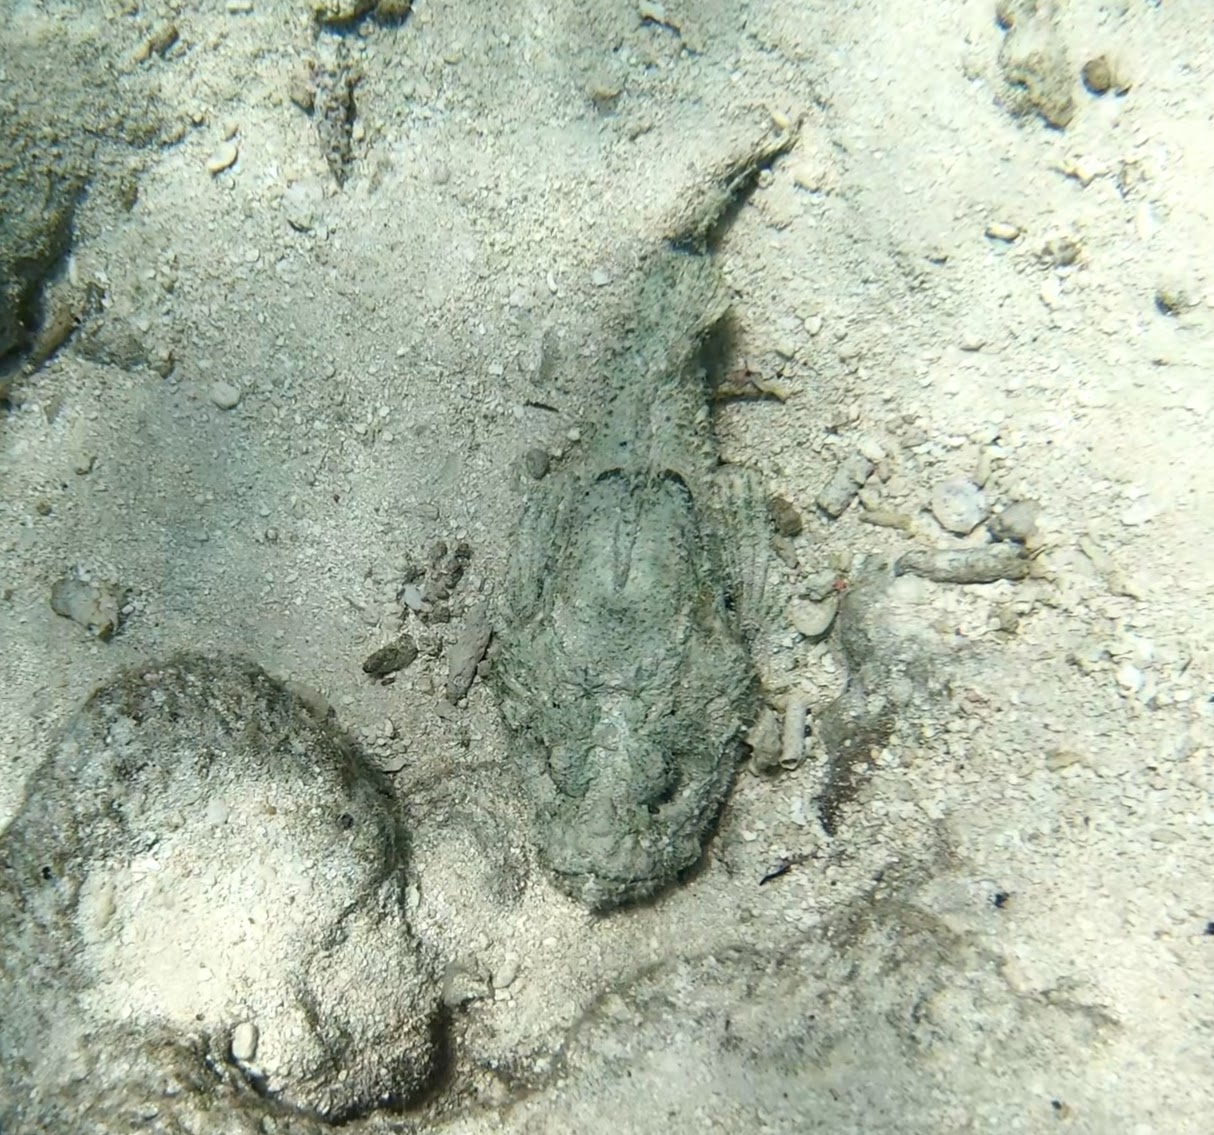 scorpion-fish-in-the-sand